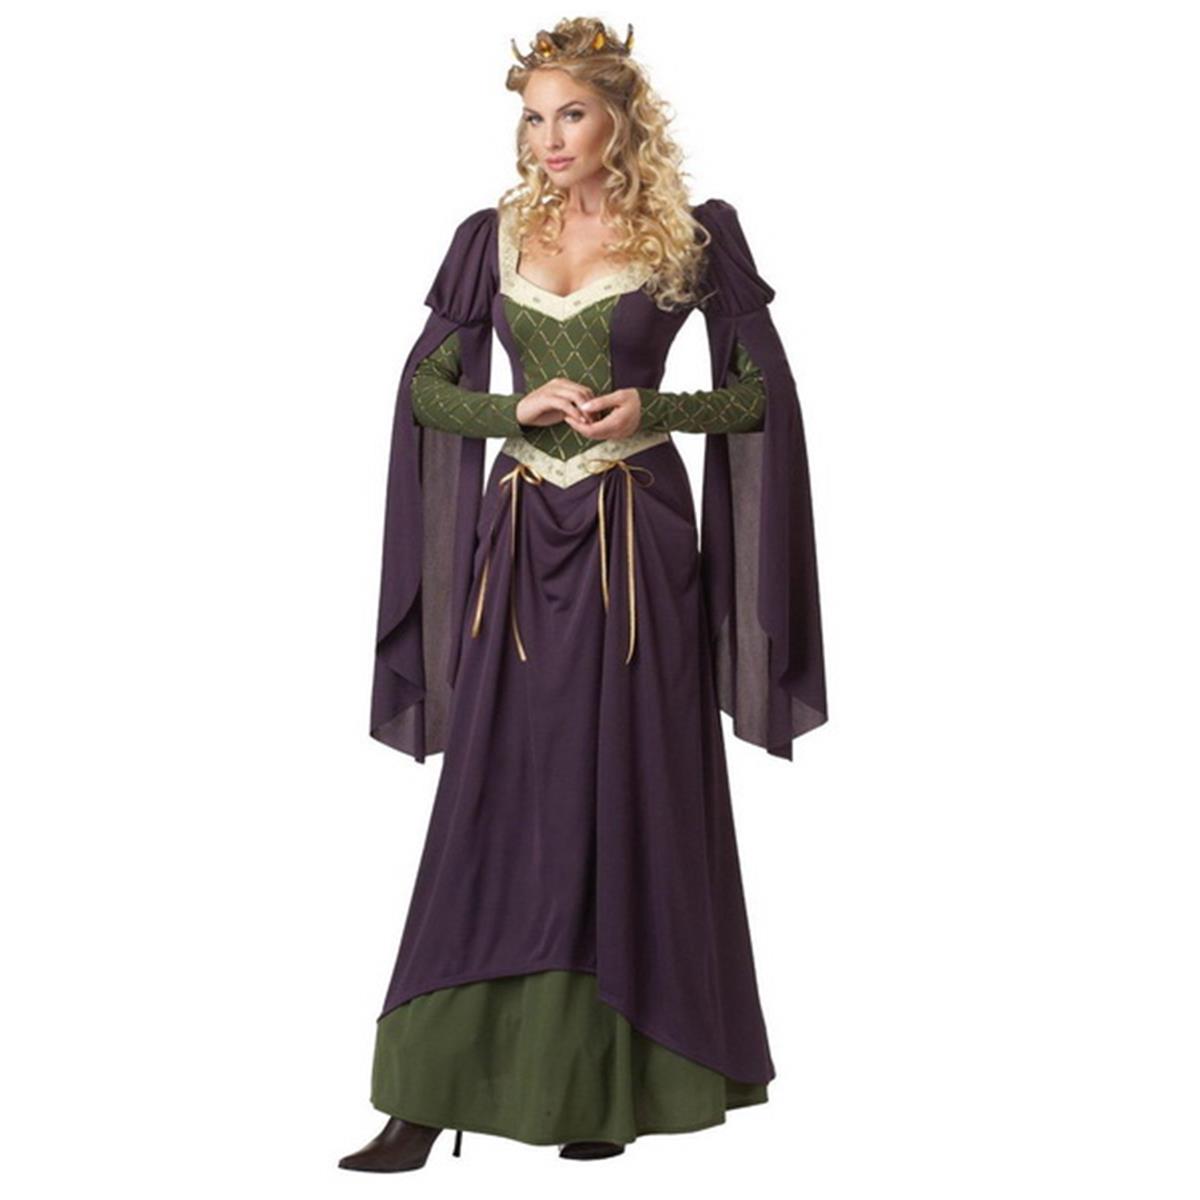 Picture of California Costumes 213108 Lady in Waiting Adult Costume - Dark Purple, Large